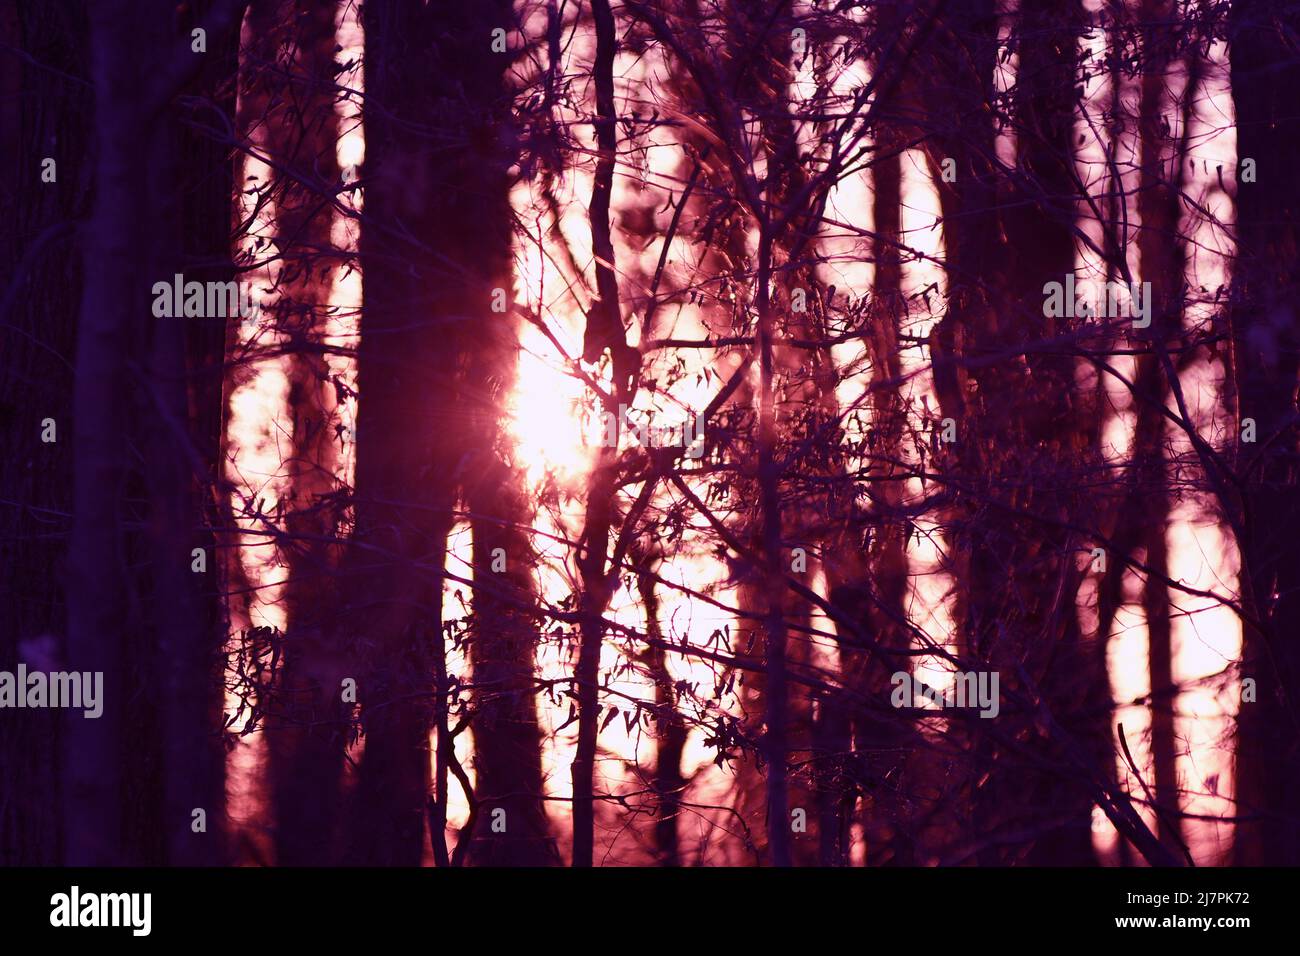 SUNSCREEN: The sun sets through the obscurity of a bare naked forest. Stock Photo